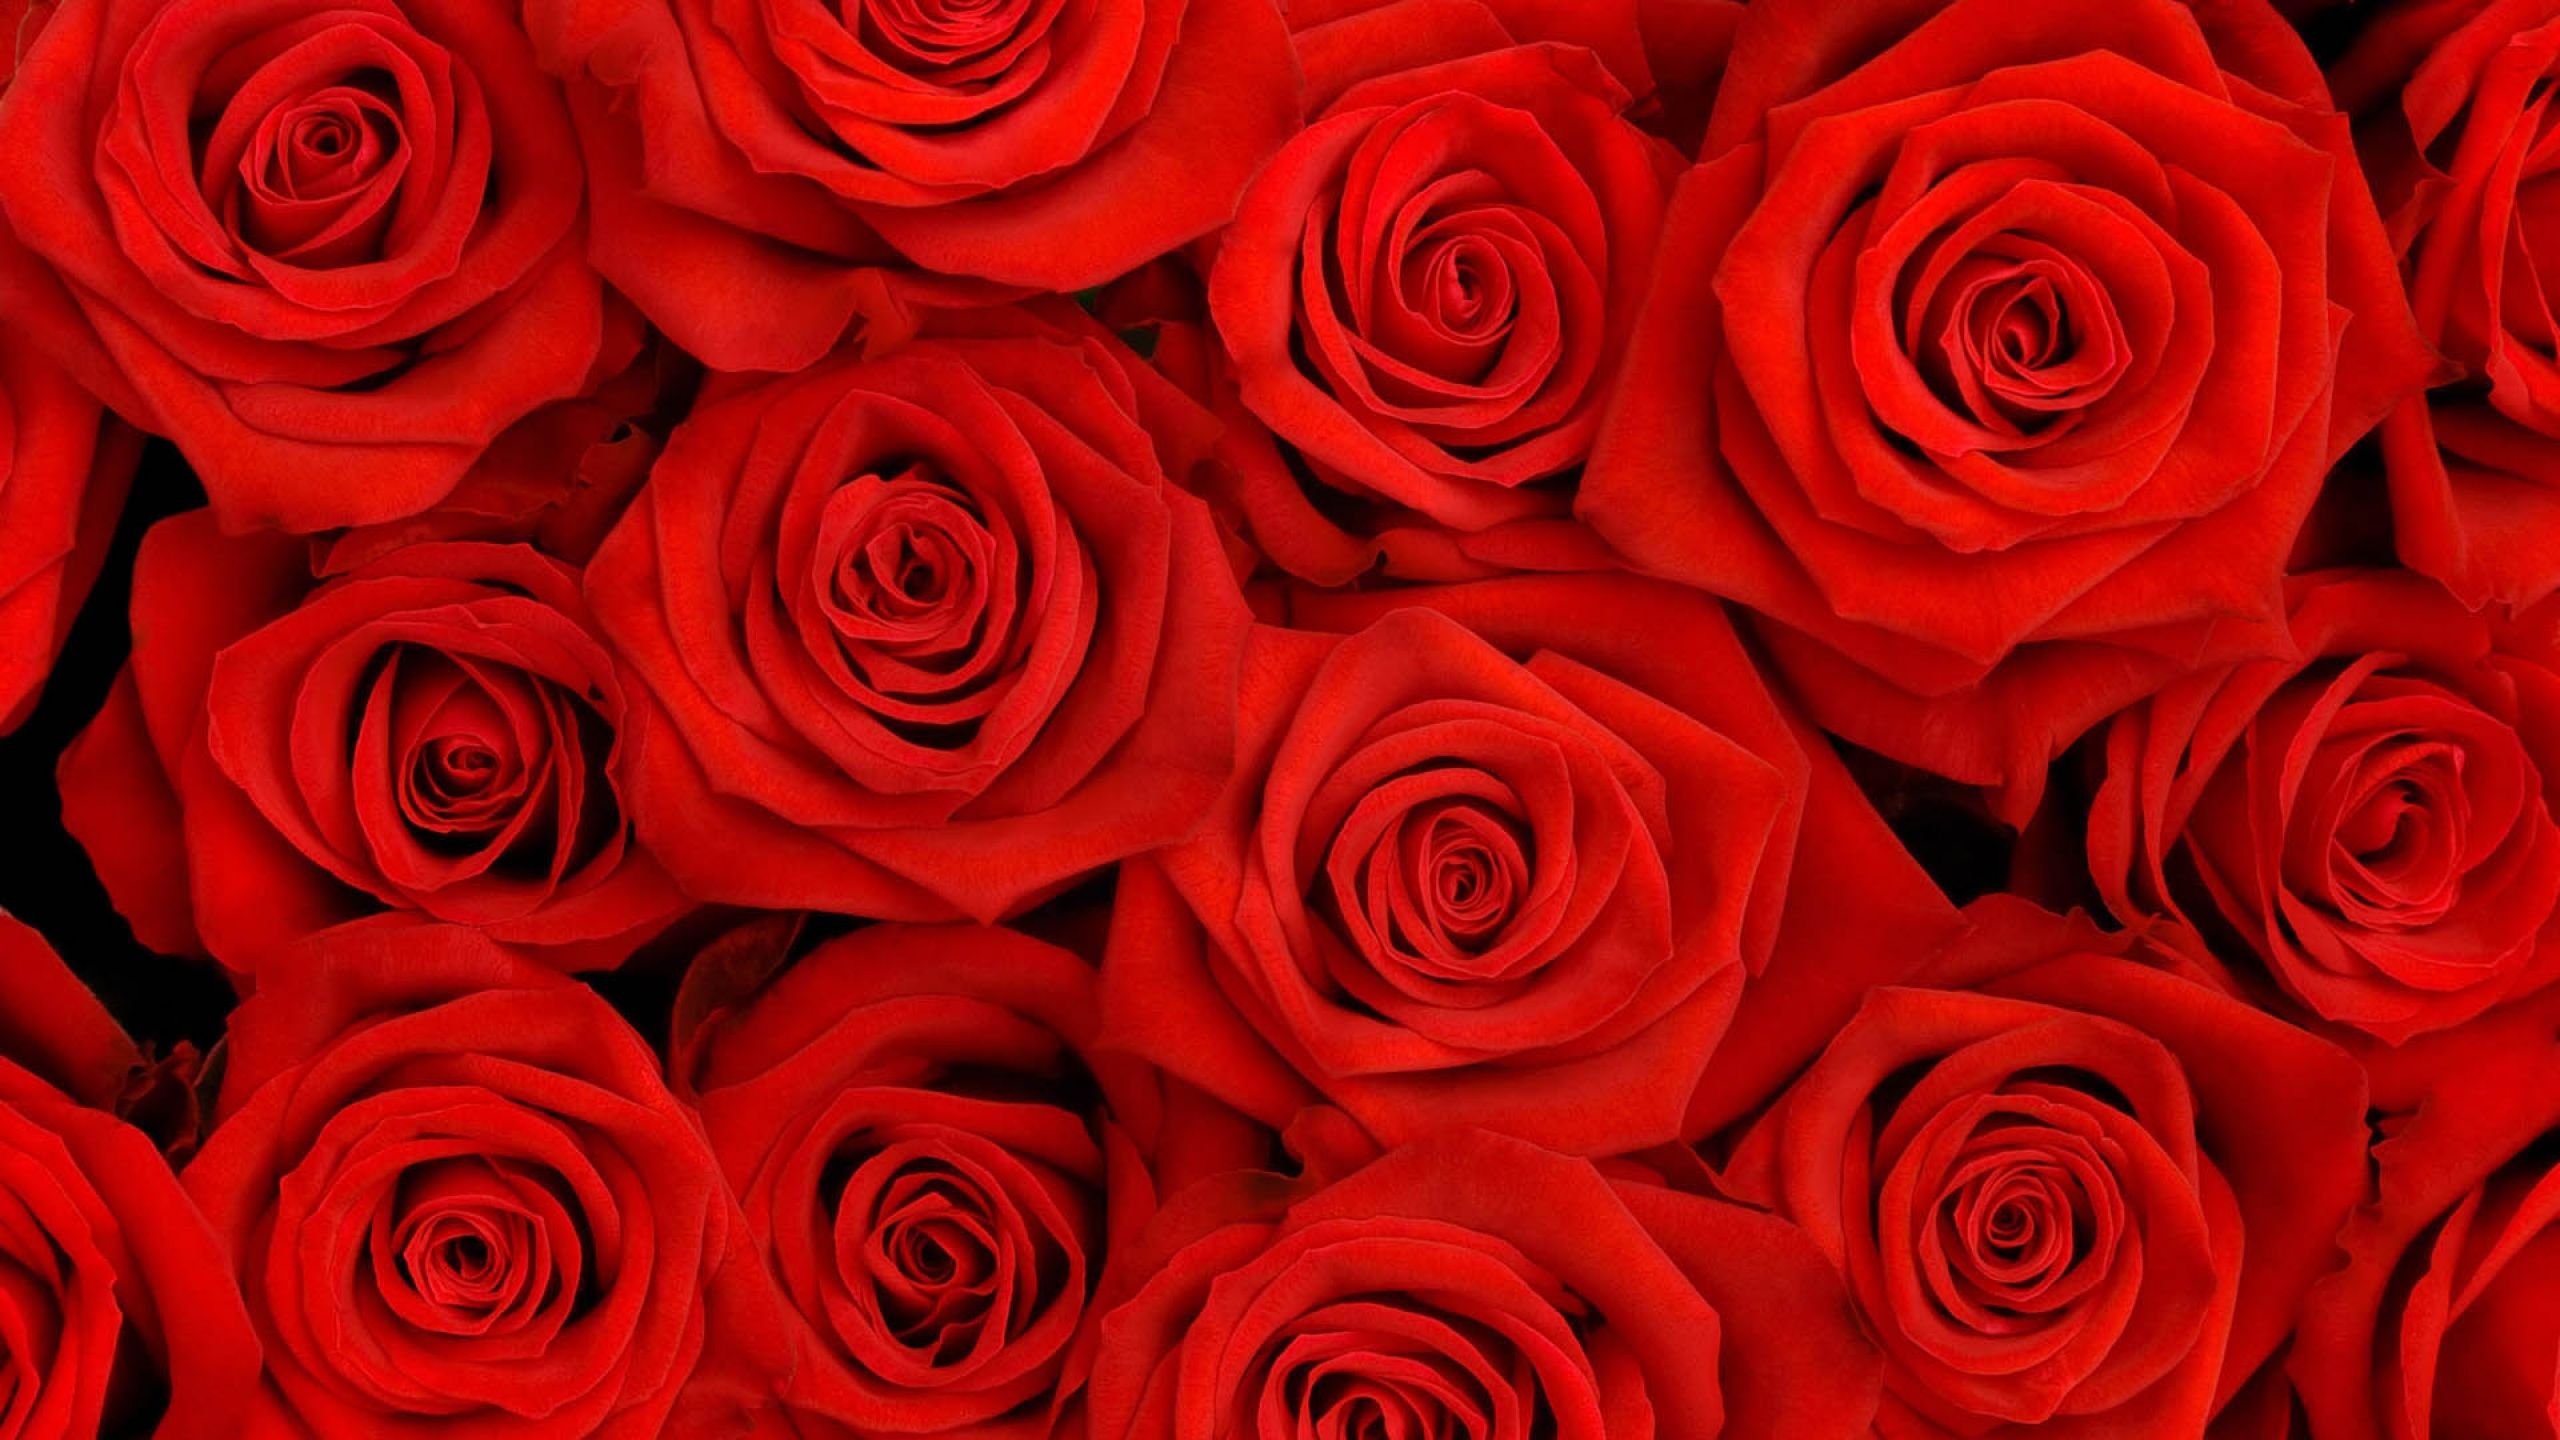 A bunch of red roses - Roses